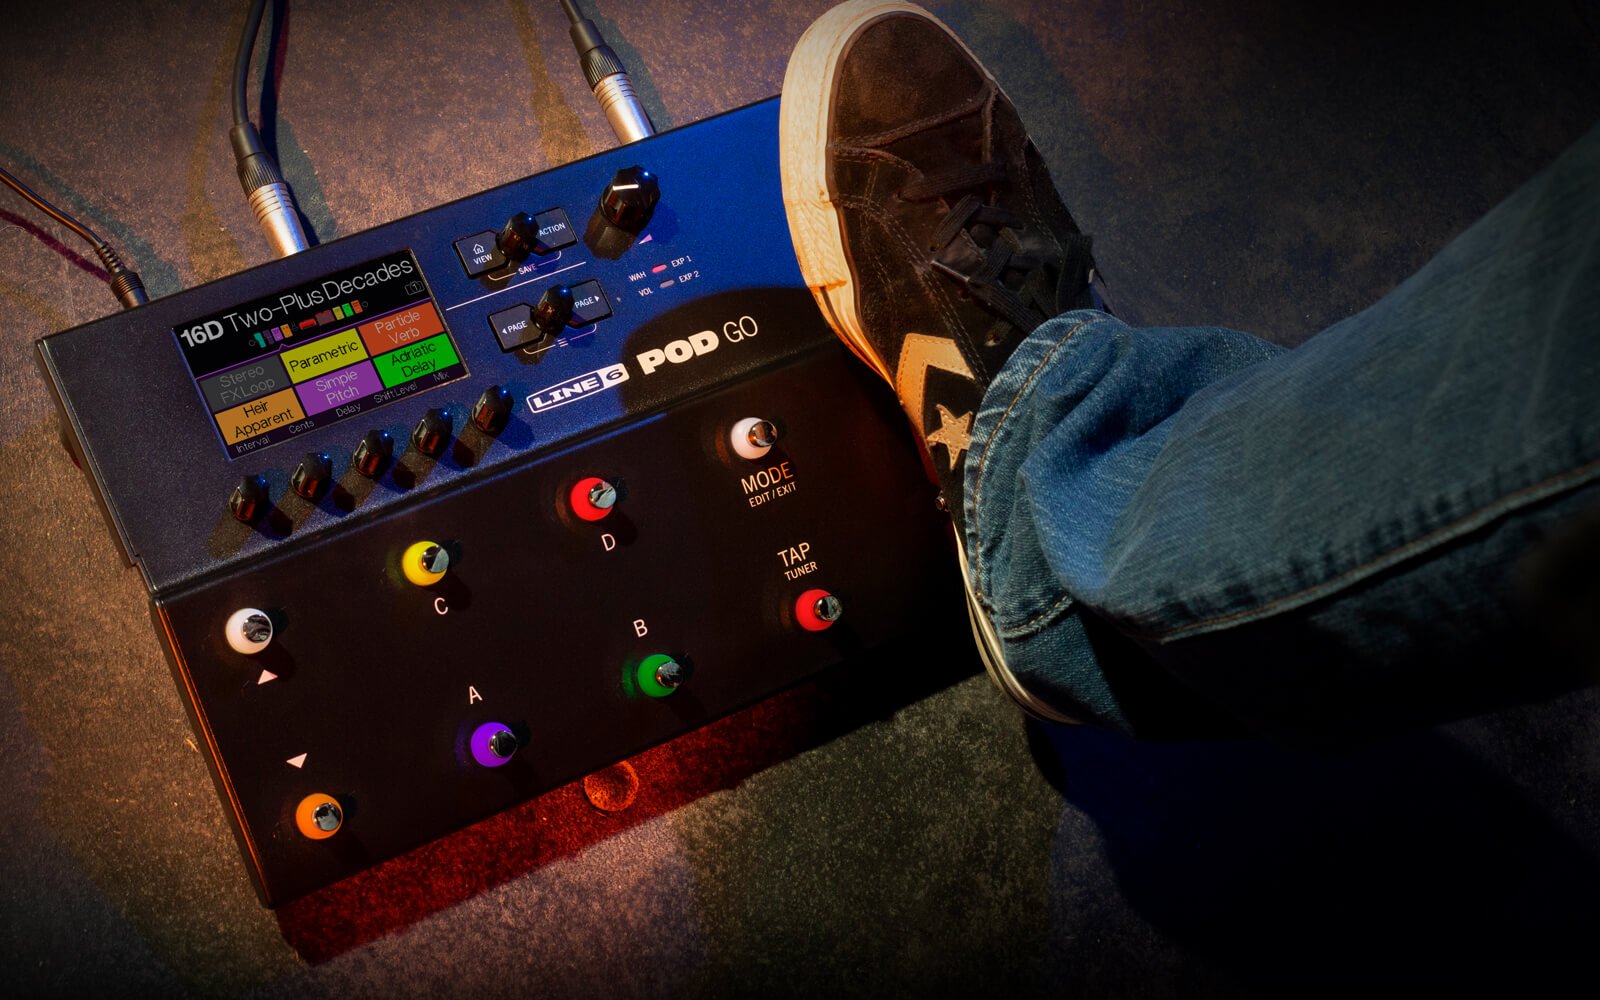 Line 6's new POD Go is an ultraportable guitar processor